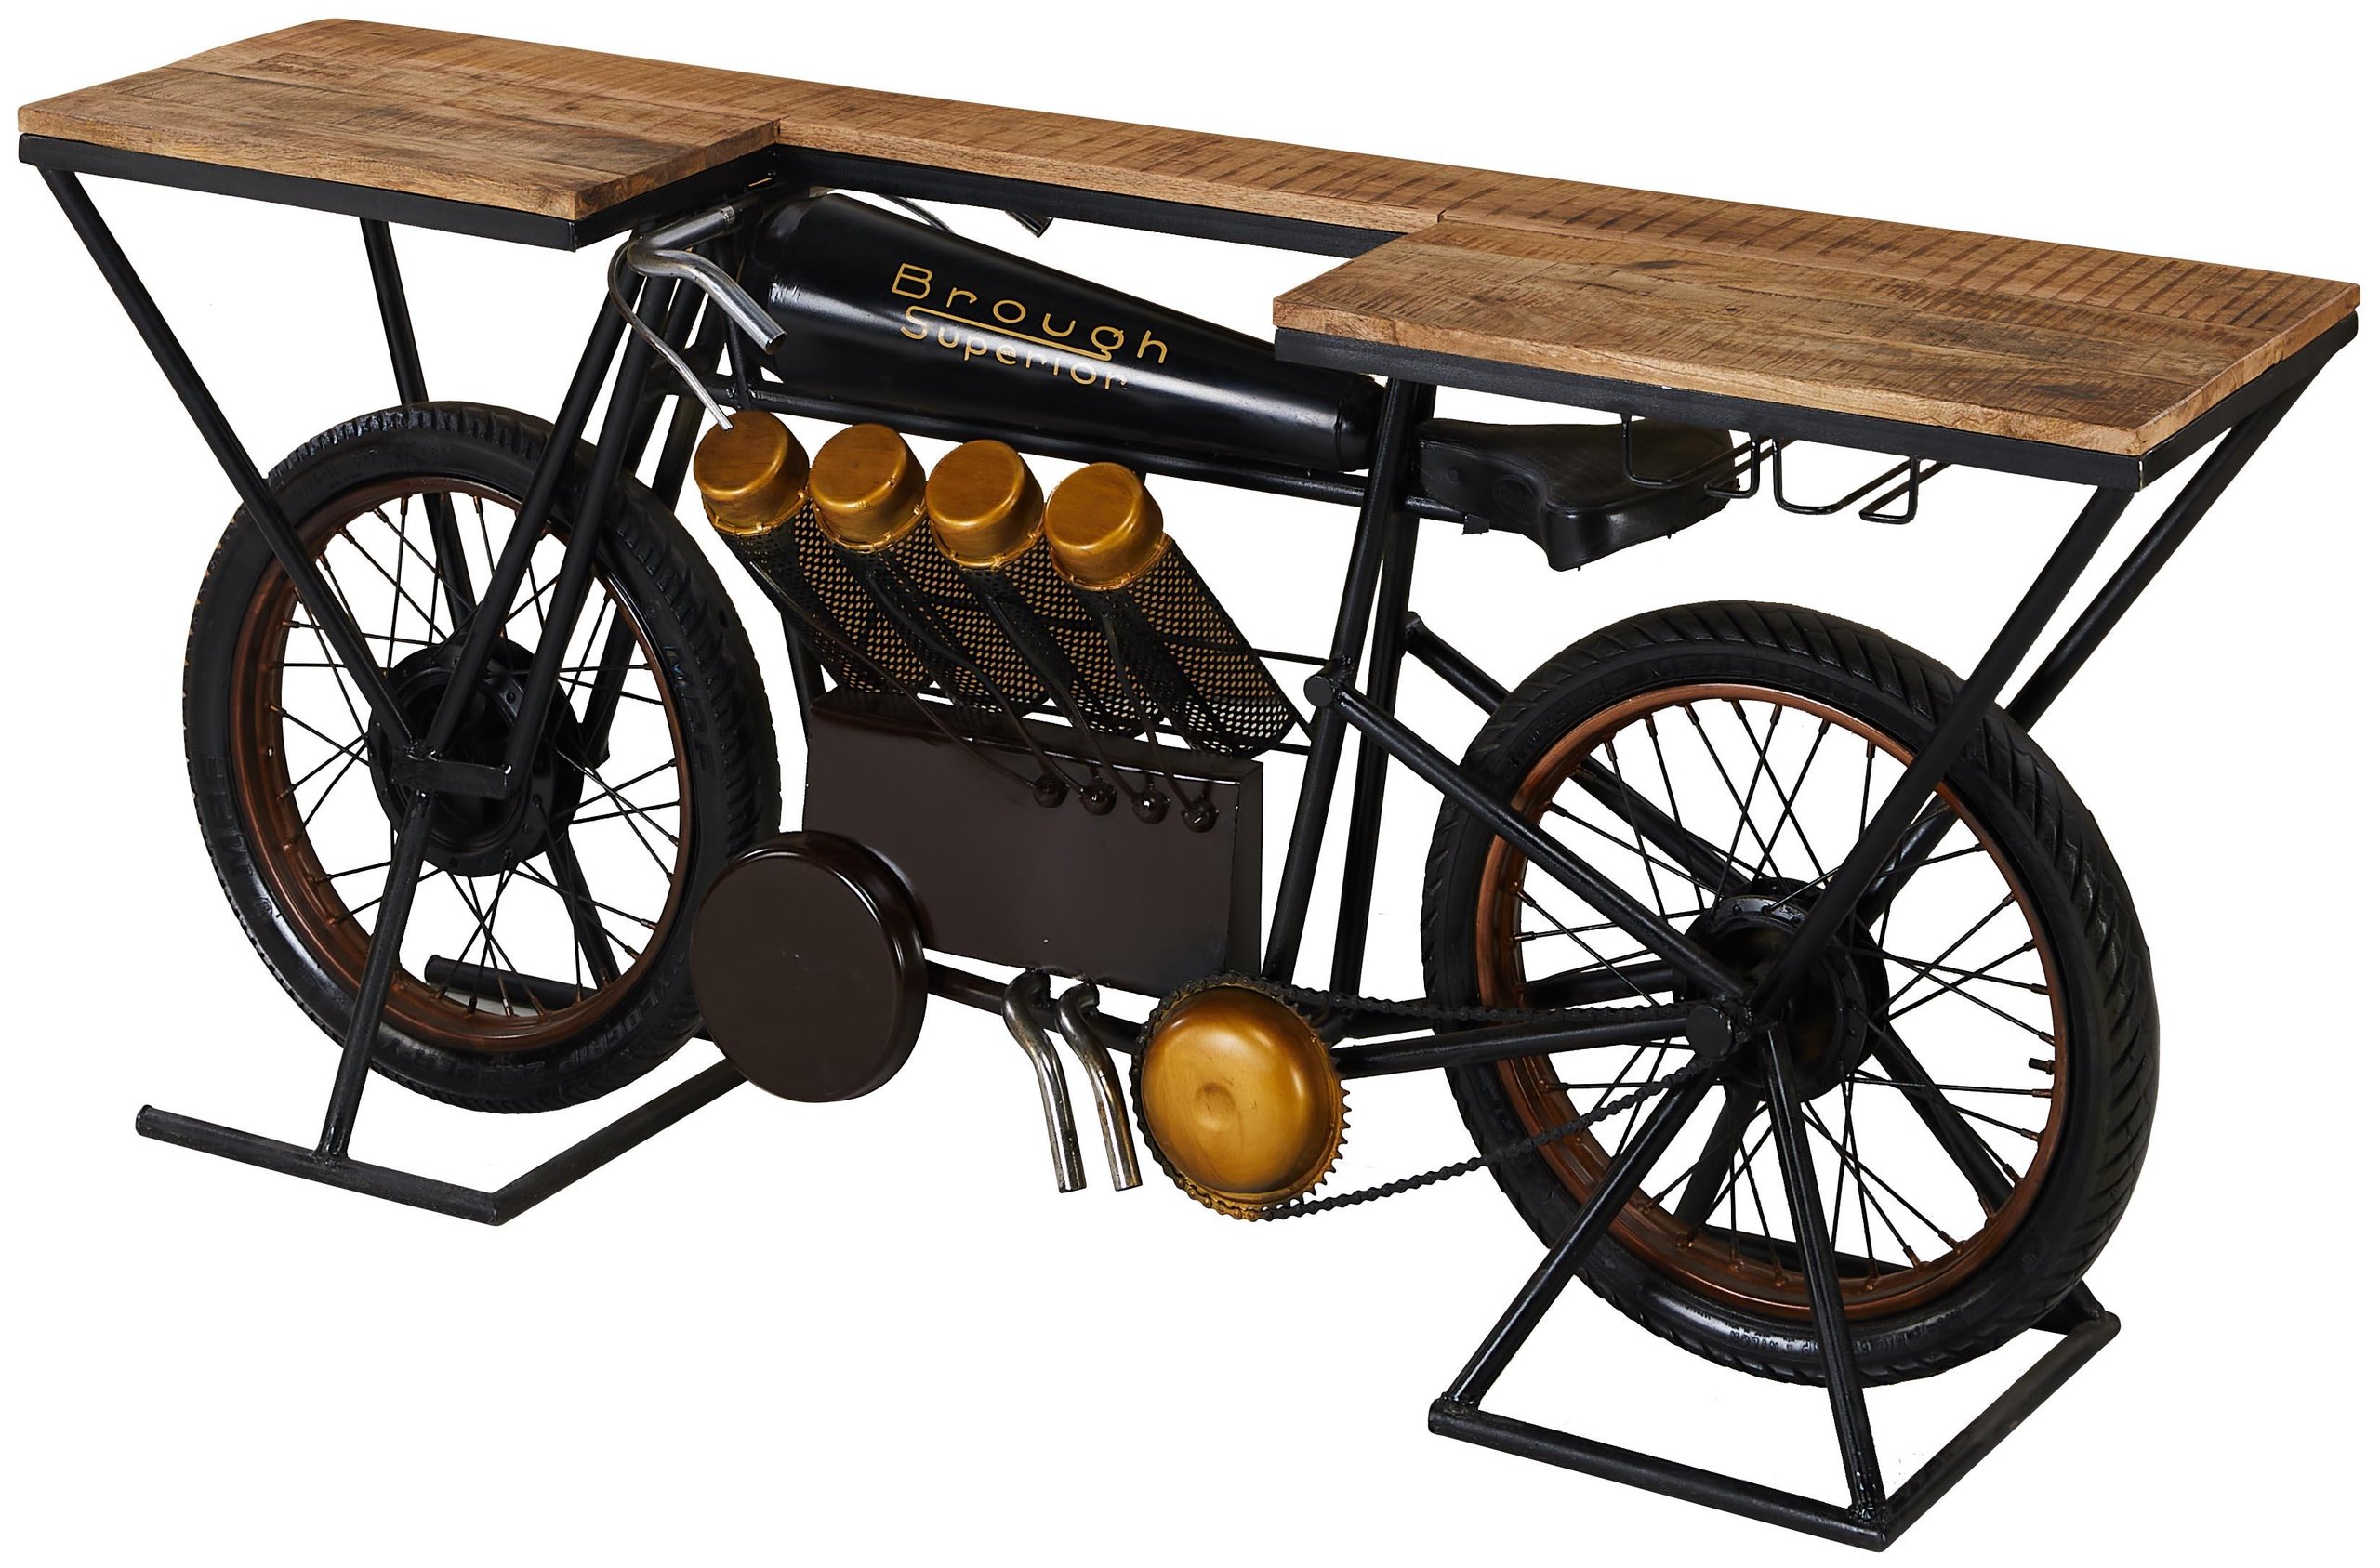 Urban Black Welded Iron & Solid Mango Bar JAIPUR HOME WOW-308 Scrambler –  buy online on NY Furniture Outlet